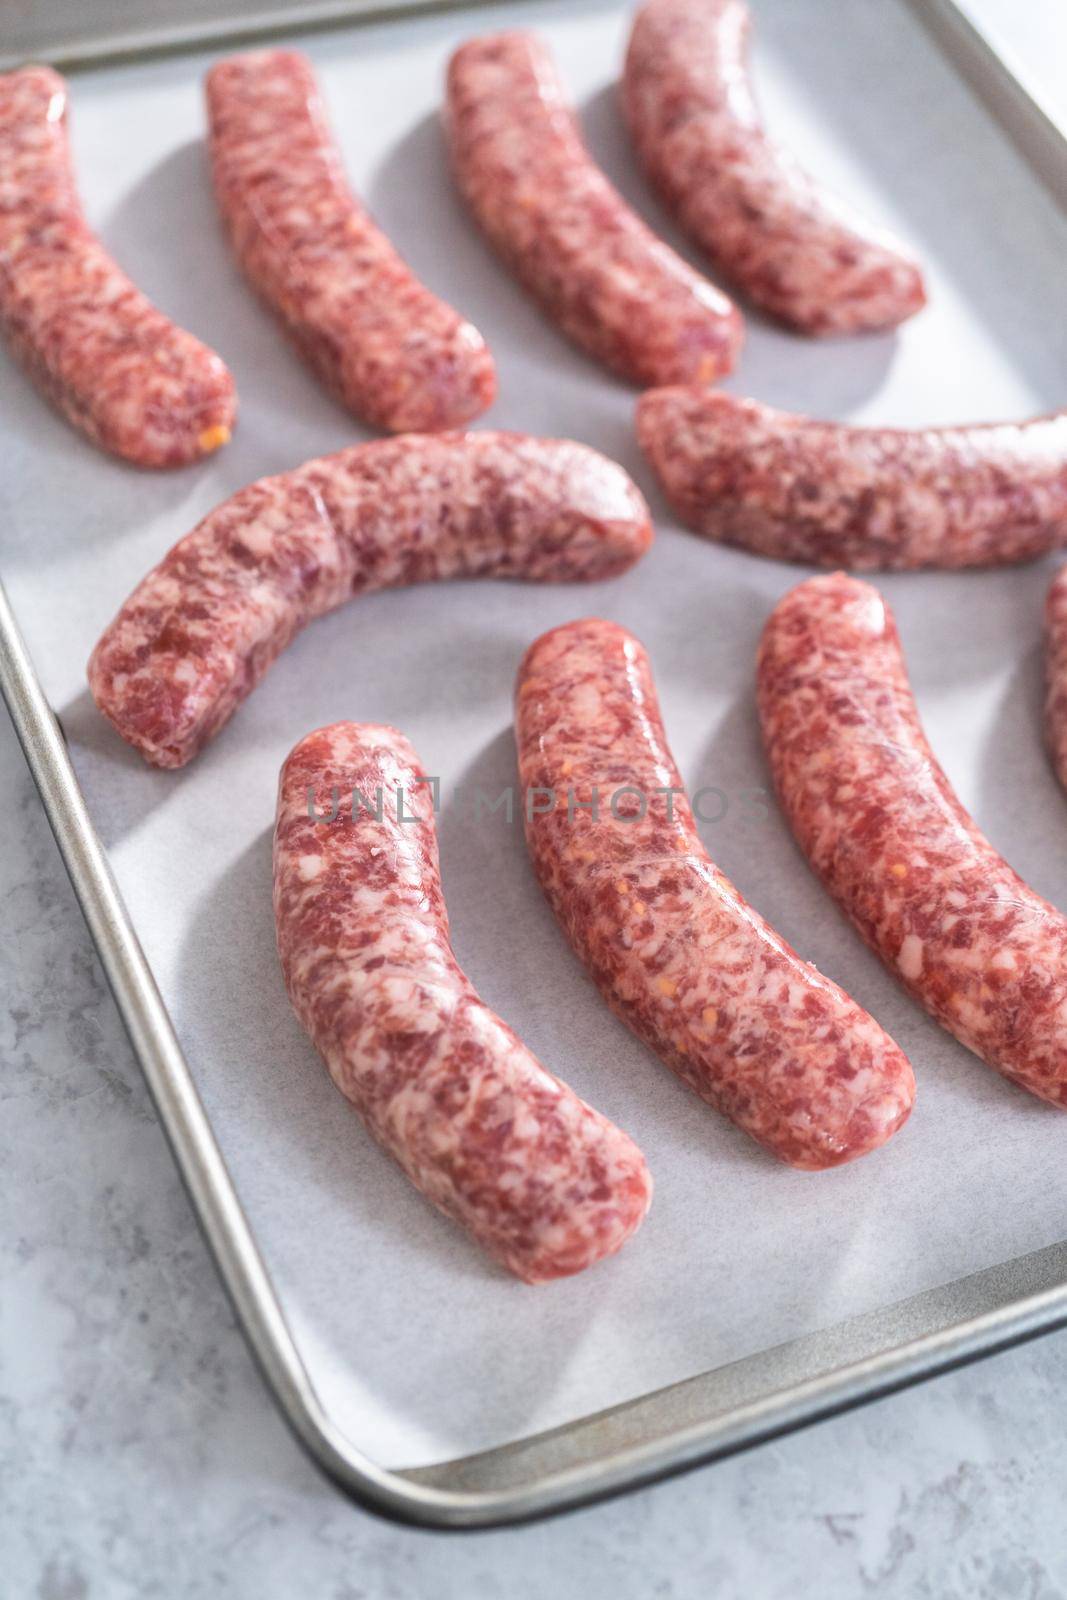 Raw beer bratwursts on a baking sheet lined with parchment paper ready to be cooked in the oven.